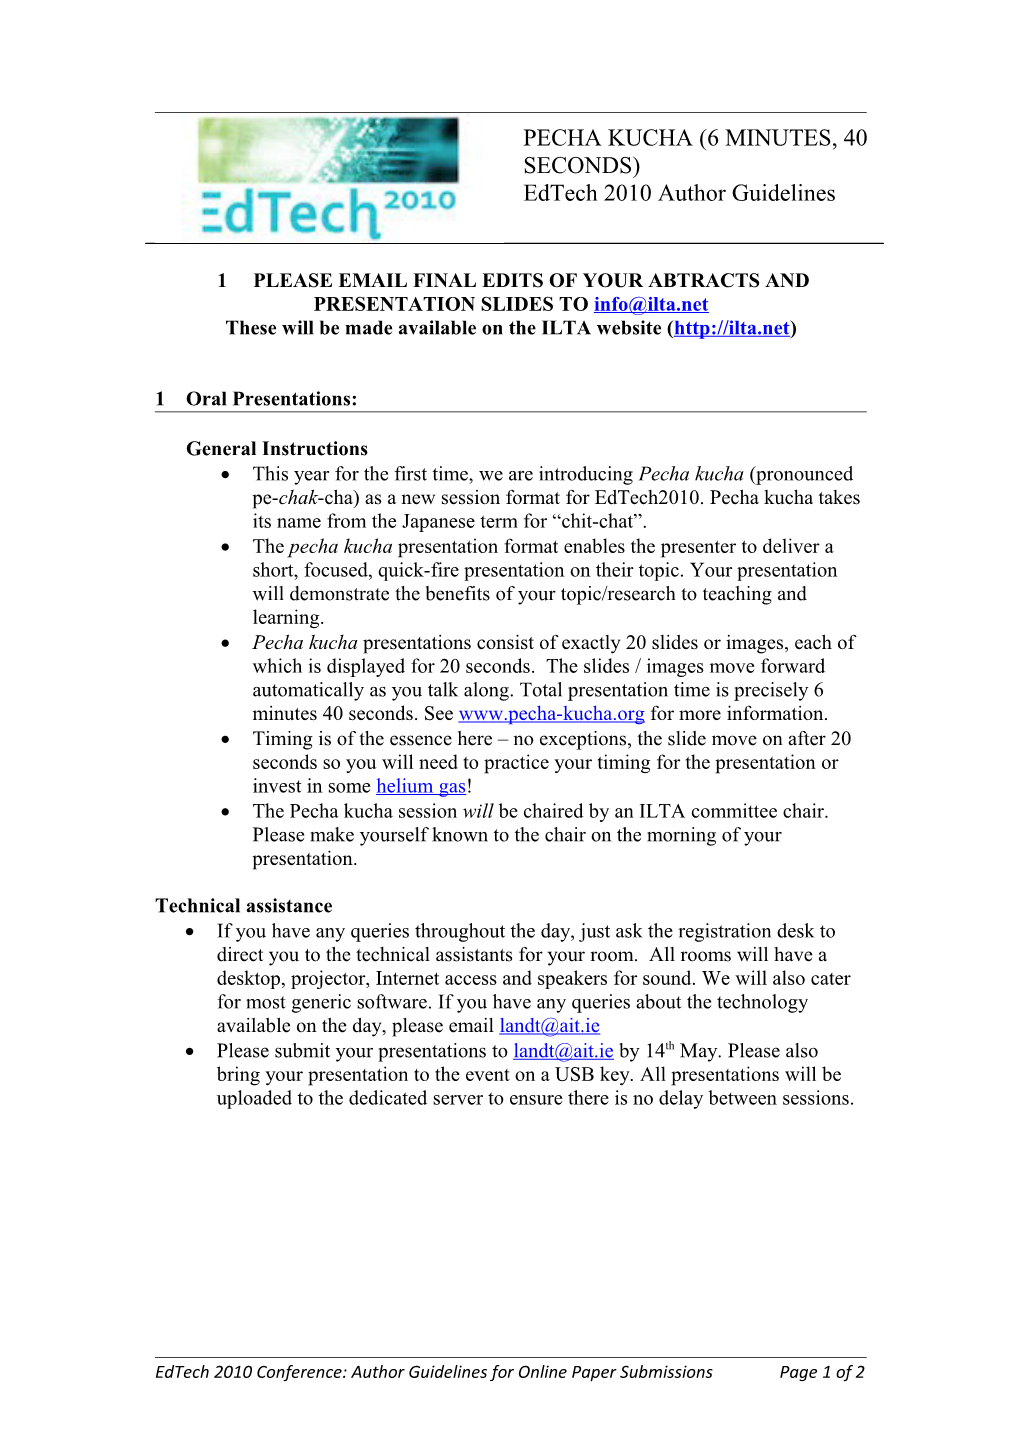 Edtech 2009 Author Guidelines for Online Paper Submissions